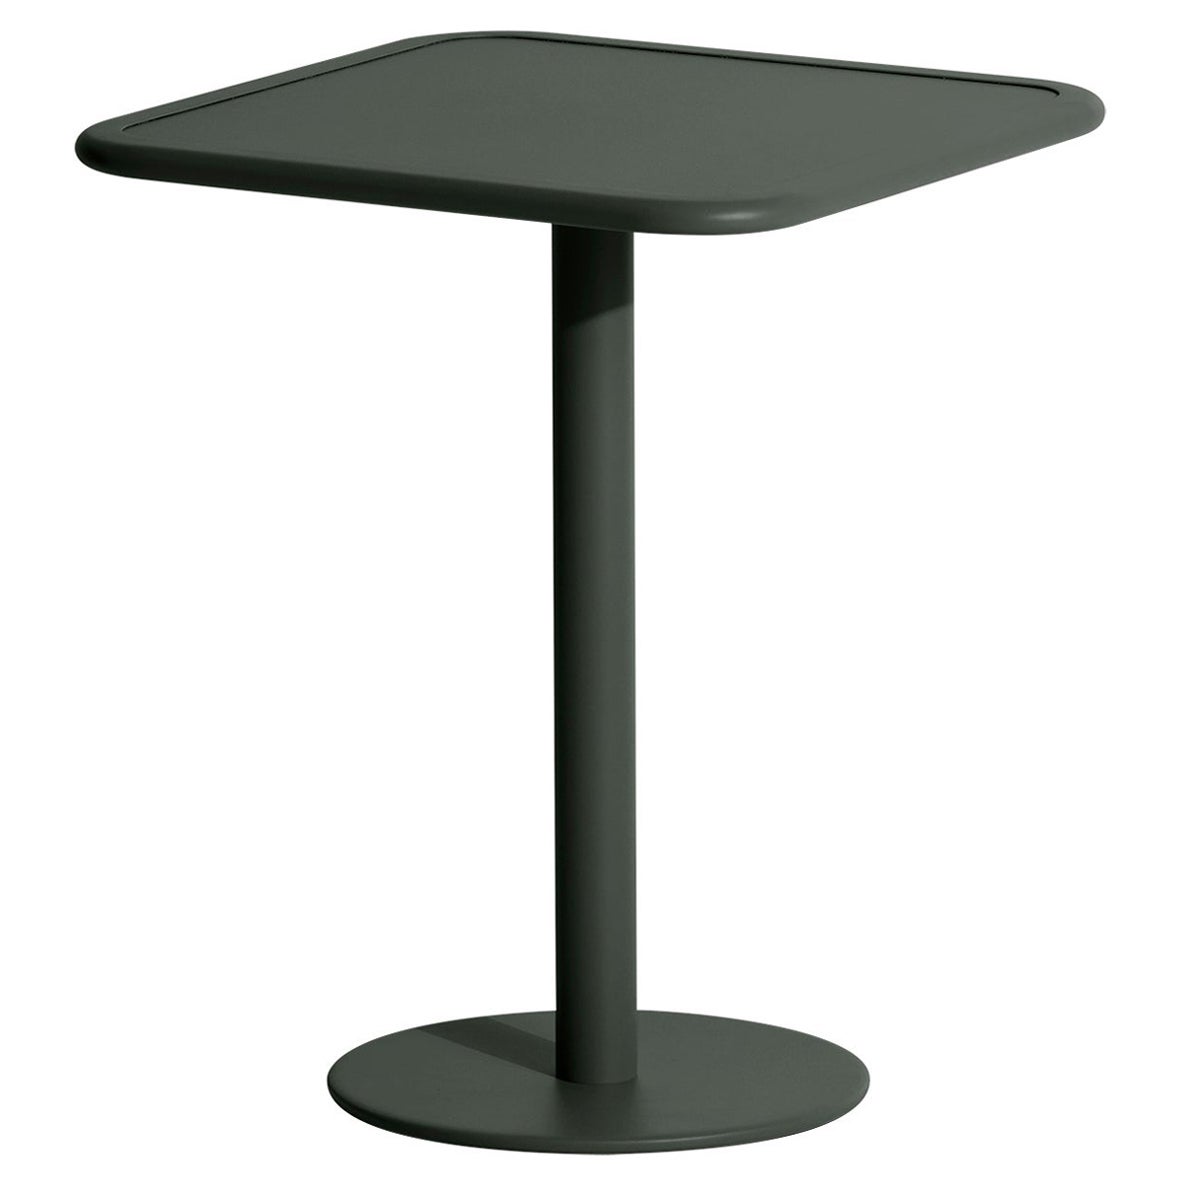 Petite Friture Week-End Bistro Square Dining Table in Glass Green Aluminium For Sale